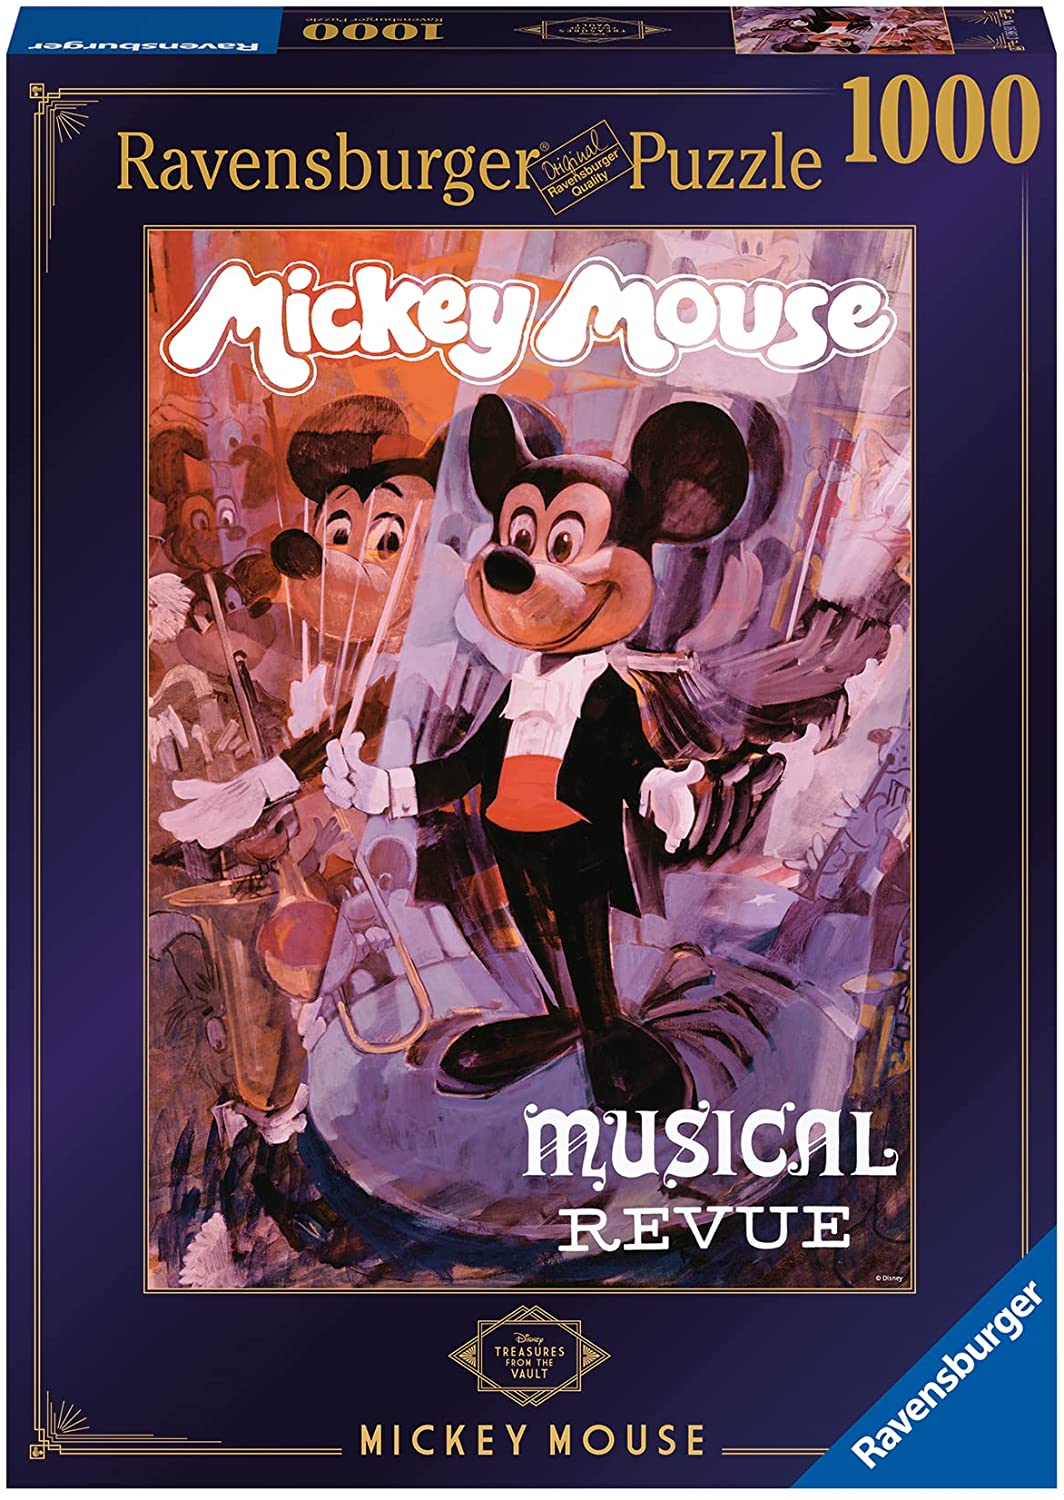 Ravensburger Puzzle Minnie and Mickey Treasures from the Vault 1000 pieces 